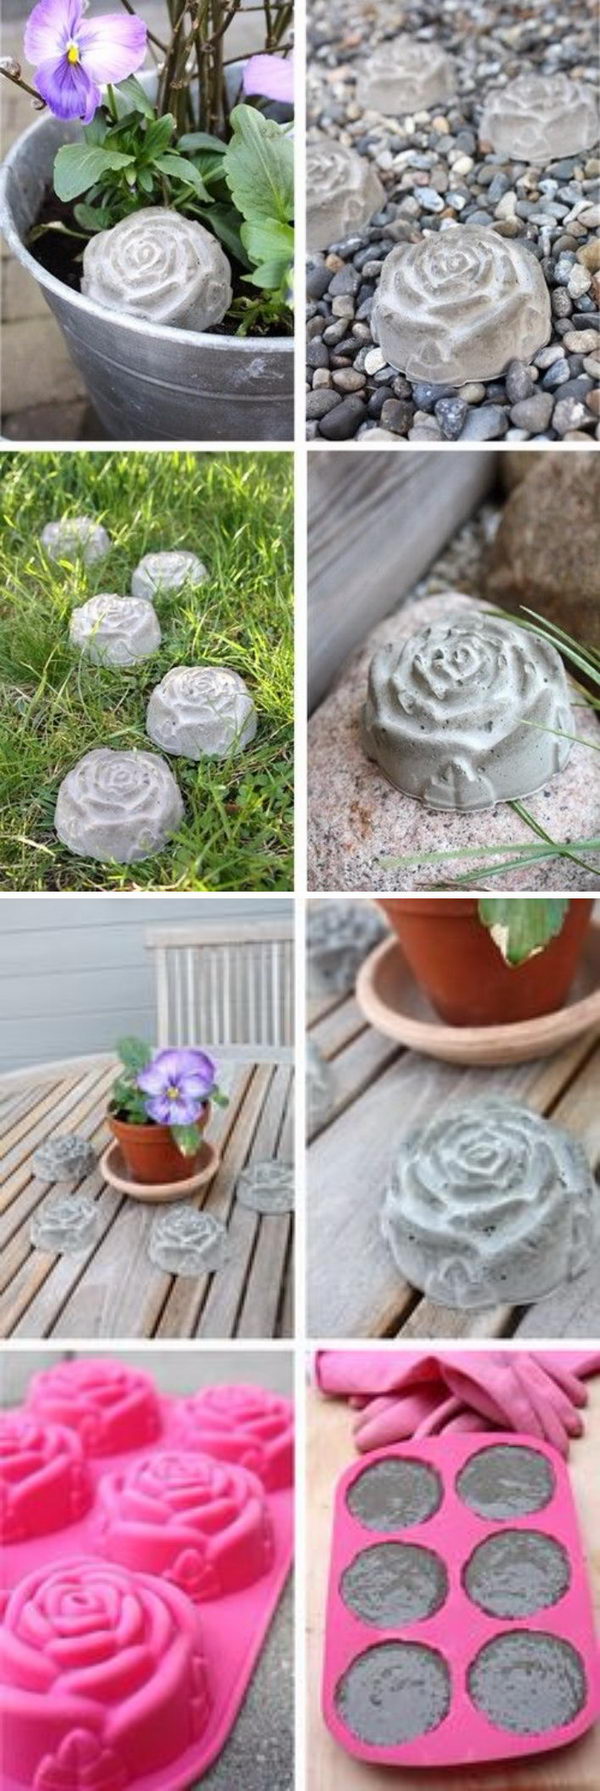 20+ Concrete DIY Projects to Beautify Your Garden   Hative